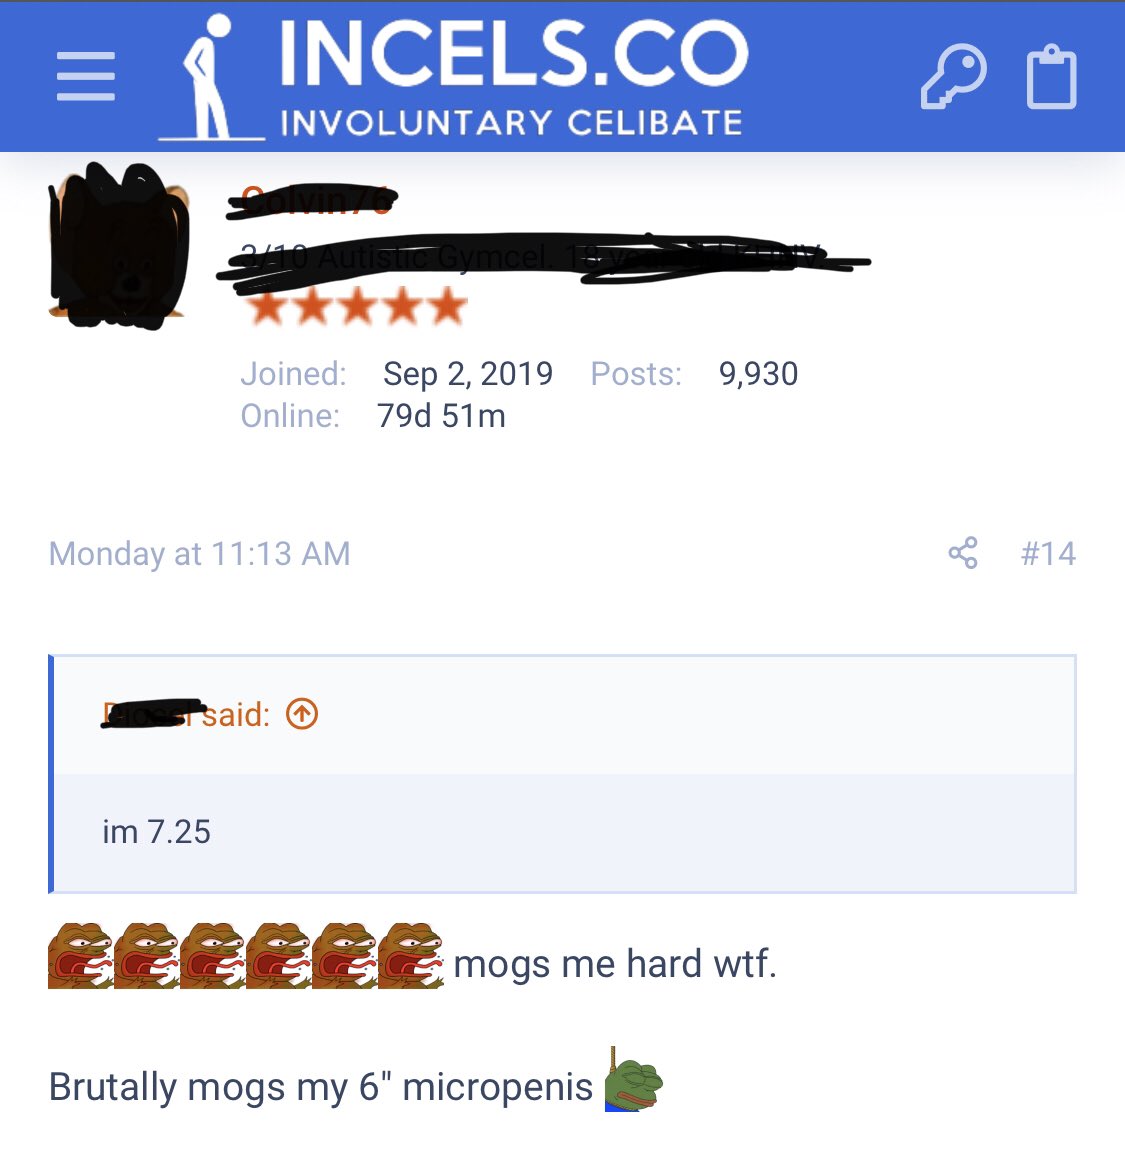 Response 7I guess since one guy announced his size it’s time to compare. “Mog” basically means to be completely outdone by another man and made invisible in the eyes of a womanWhich I guess this one incel did to the other incel by just having a bigger dick?  #incelglossary